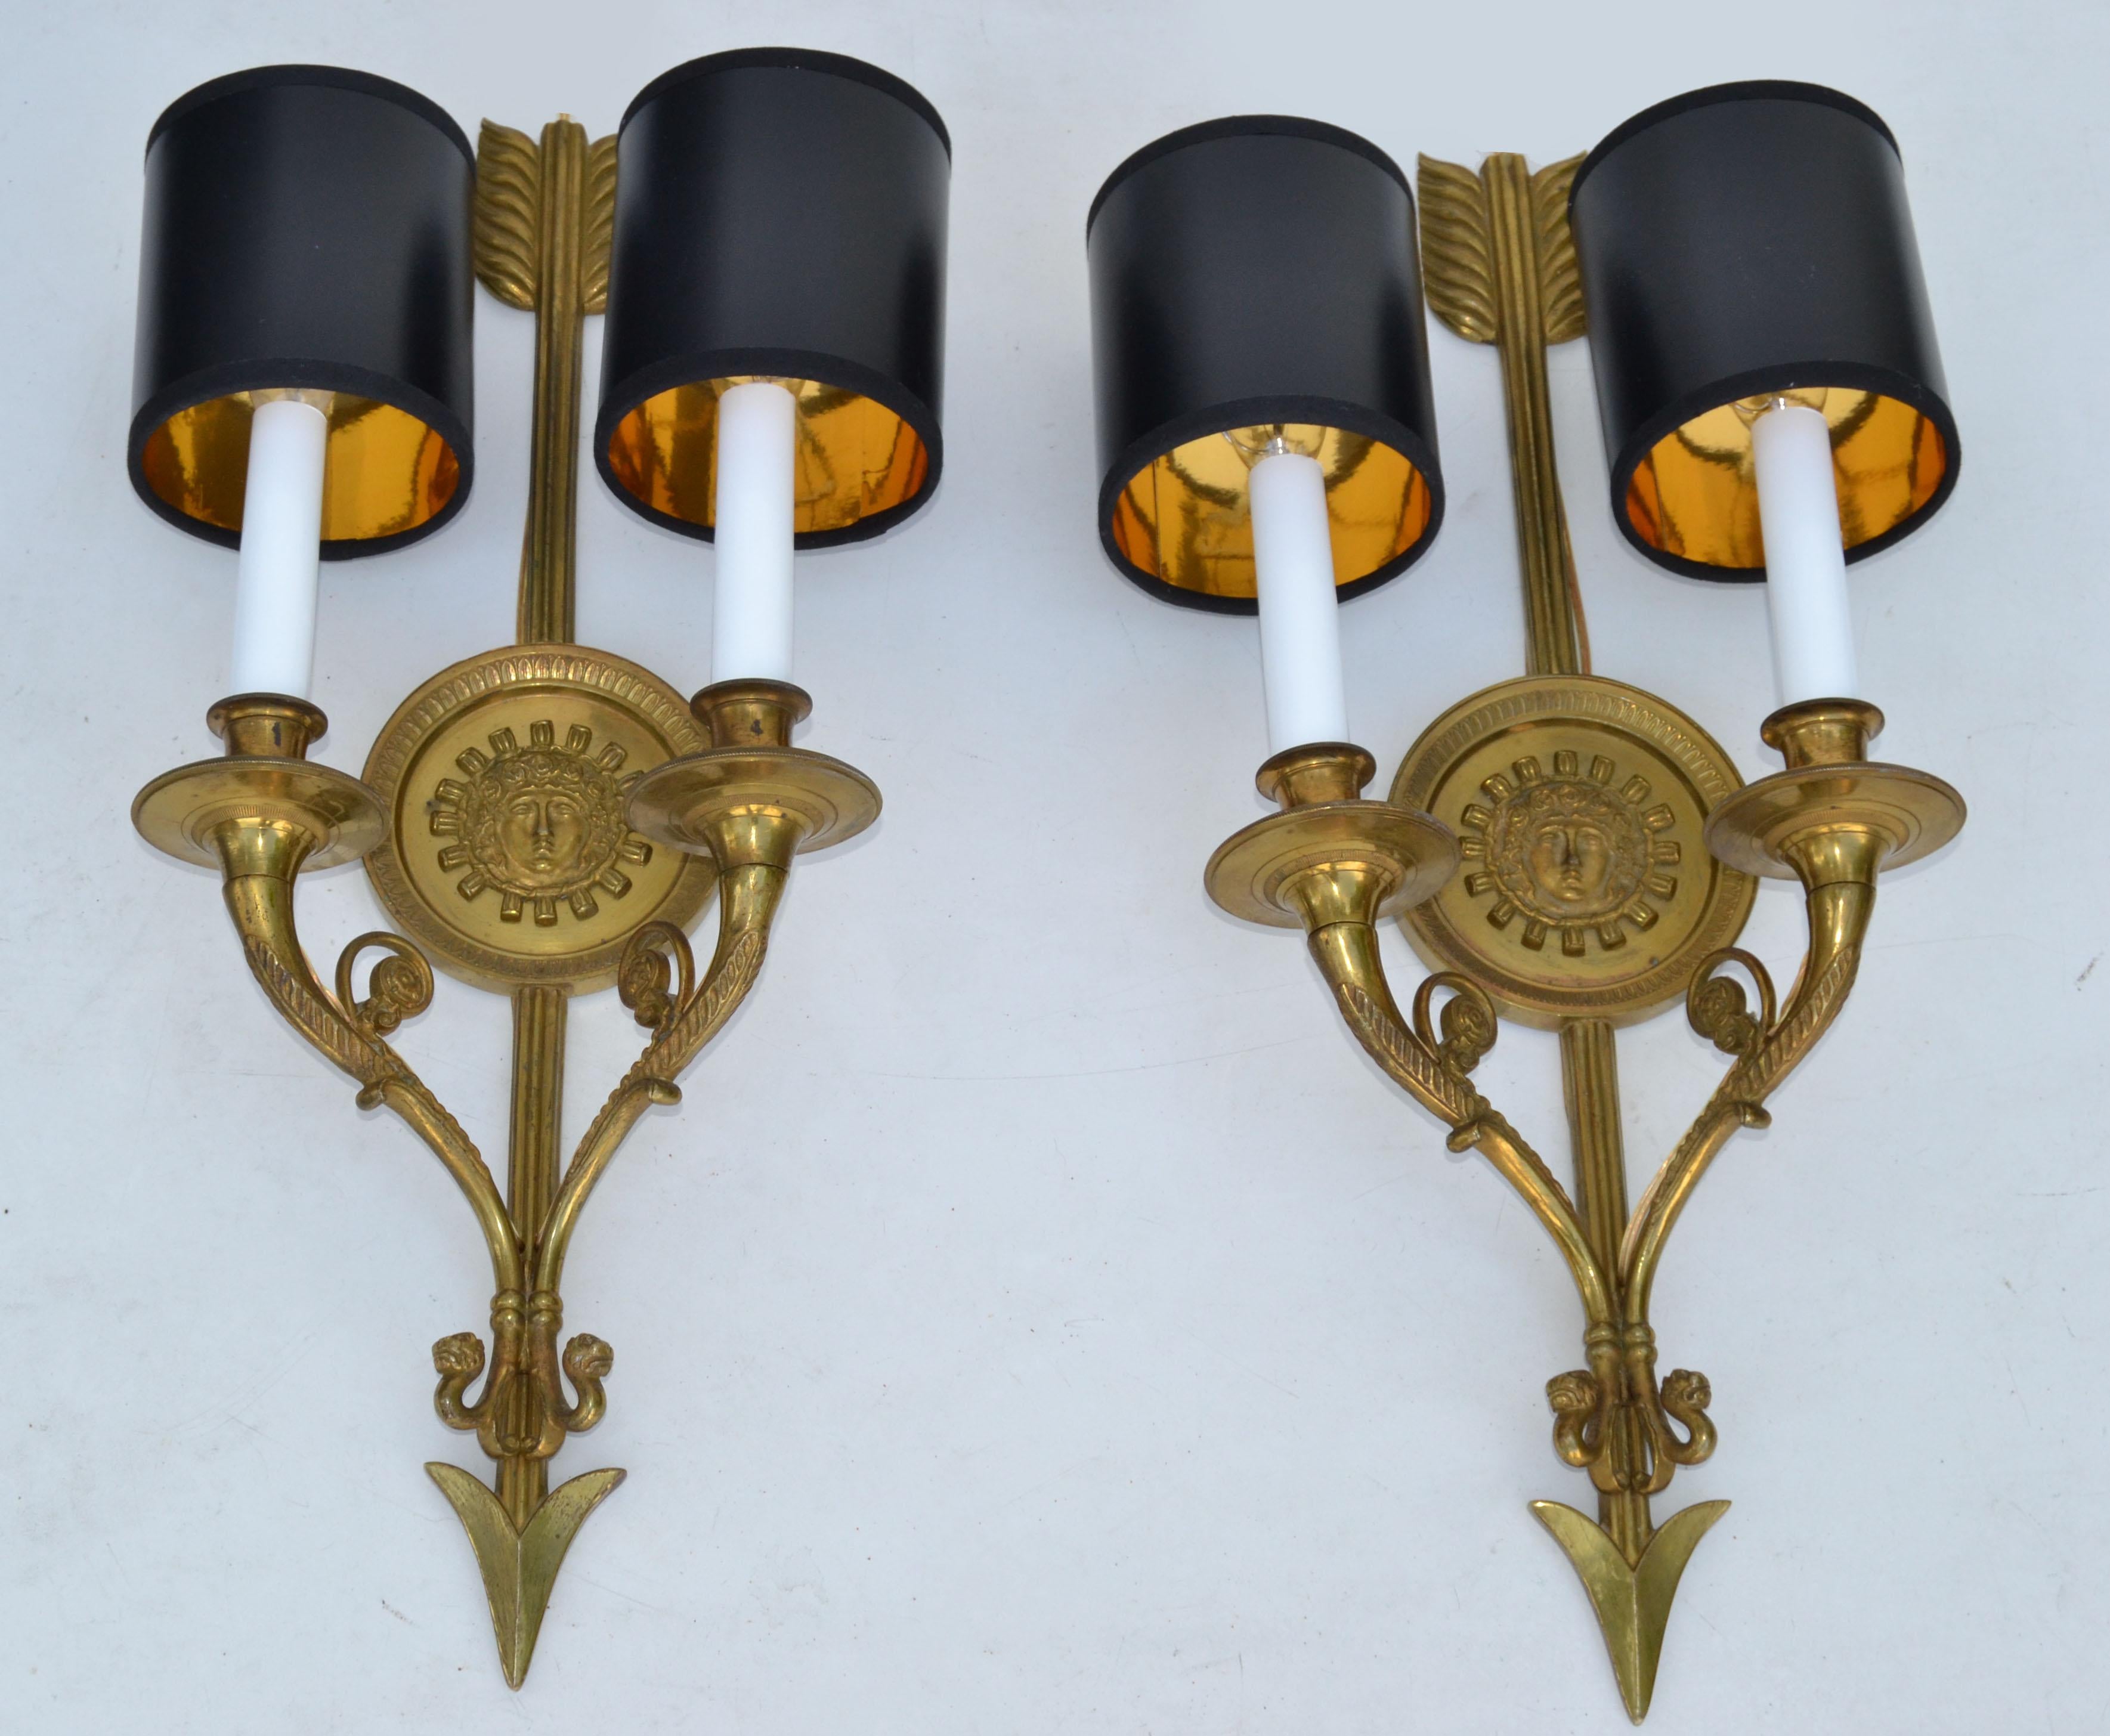 Pair of Andre Arbus Bronze Arrow Sconces 2 Lights, Wall Lamp French Neoclassical In Good Condition For Sale In Miami, FL